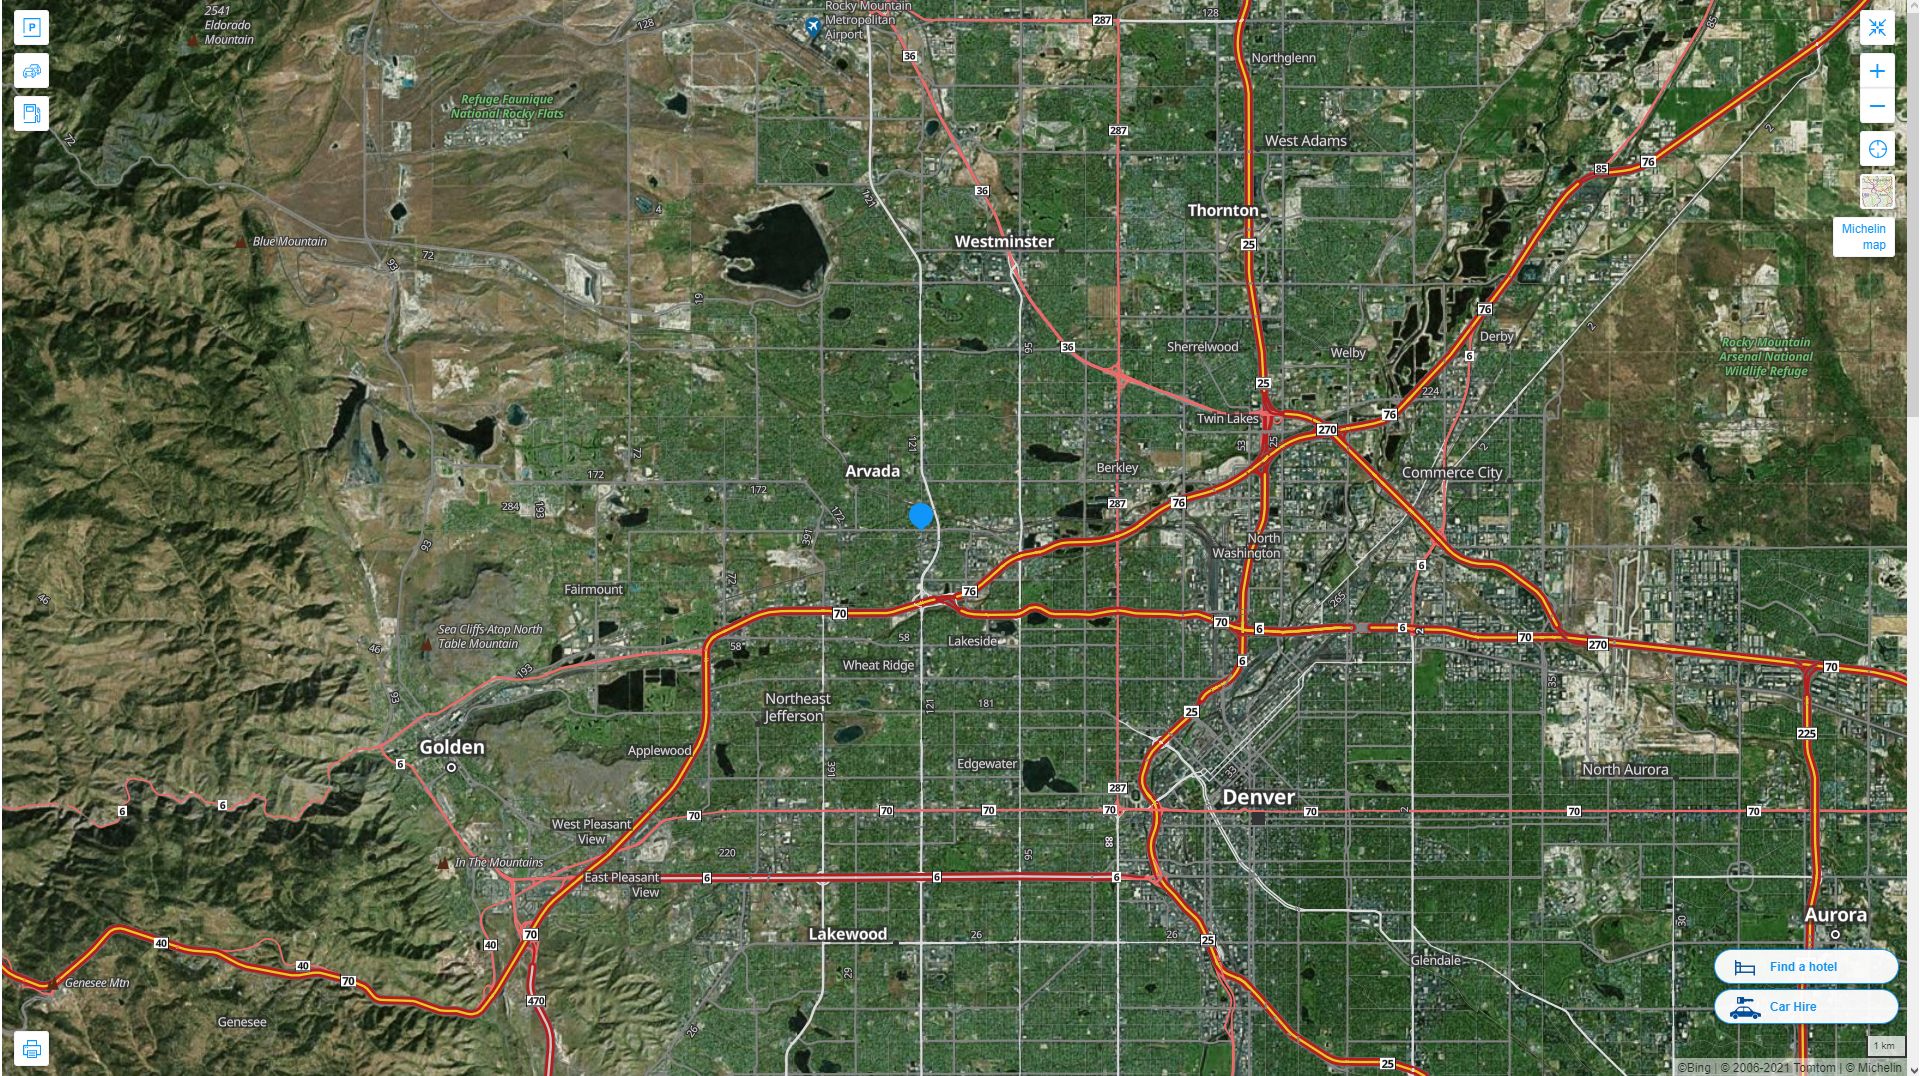 Arvada Colorado Highway and Road Map with Satellite View